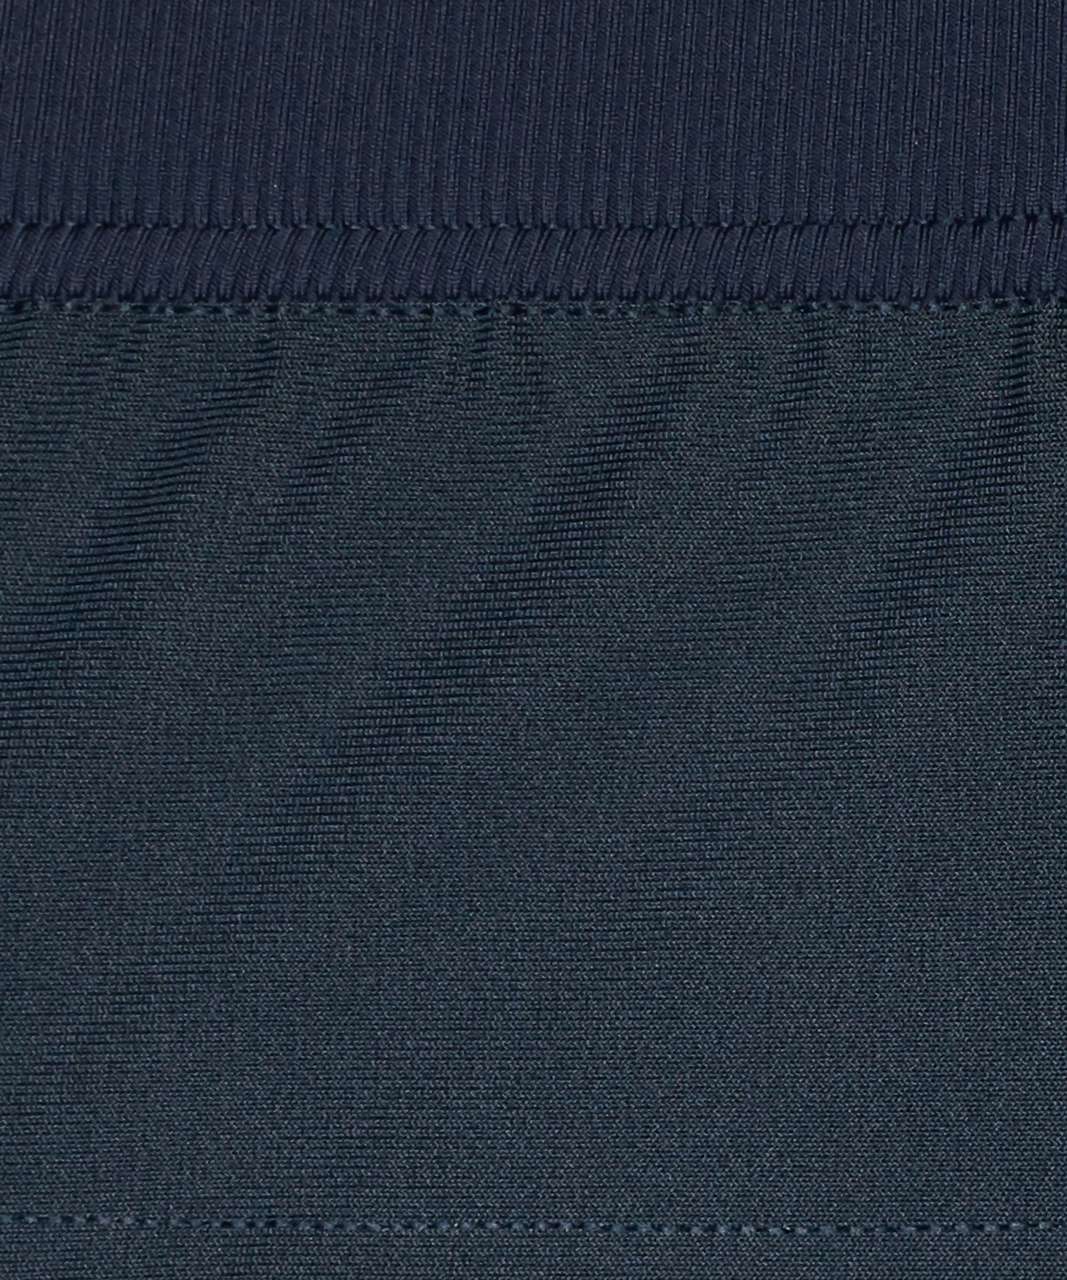 Lululemon ABC Jogger Pant Navy Men New with Tags $128.00 32-34